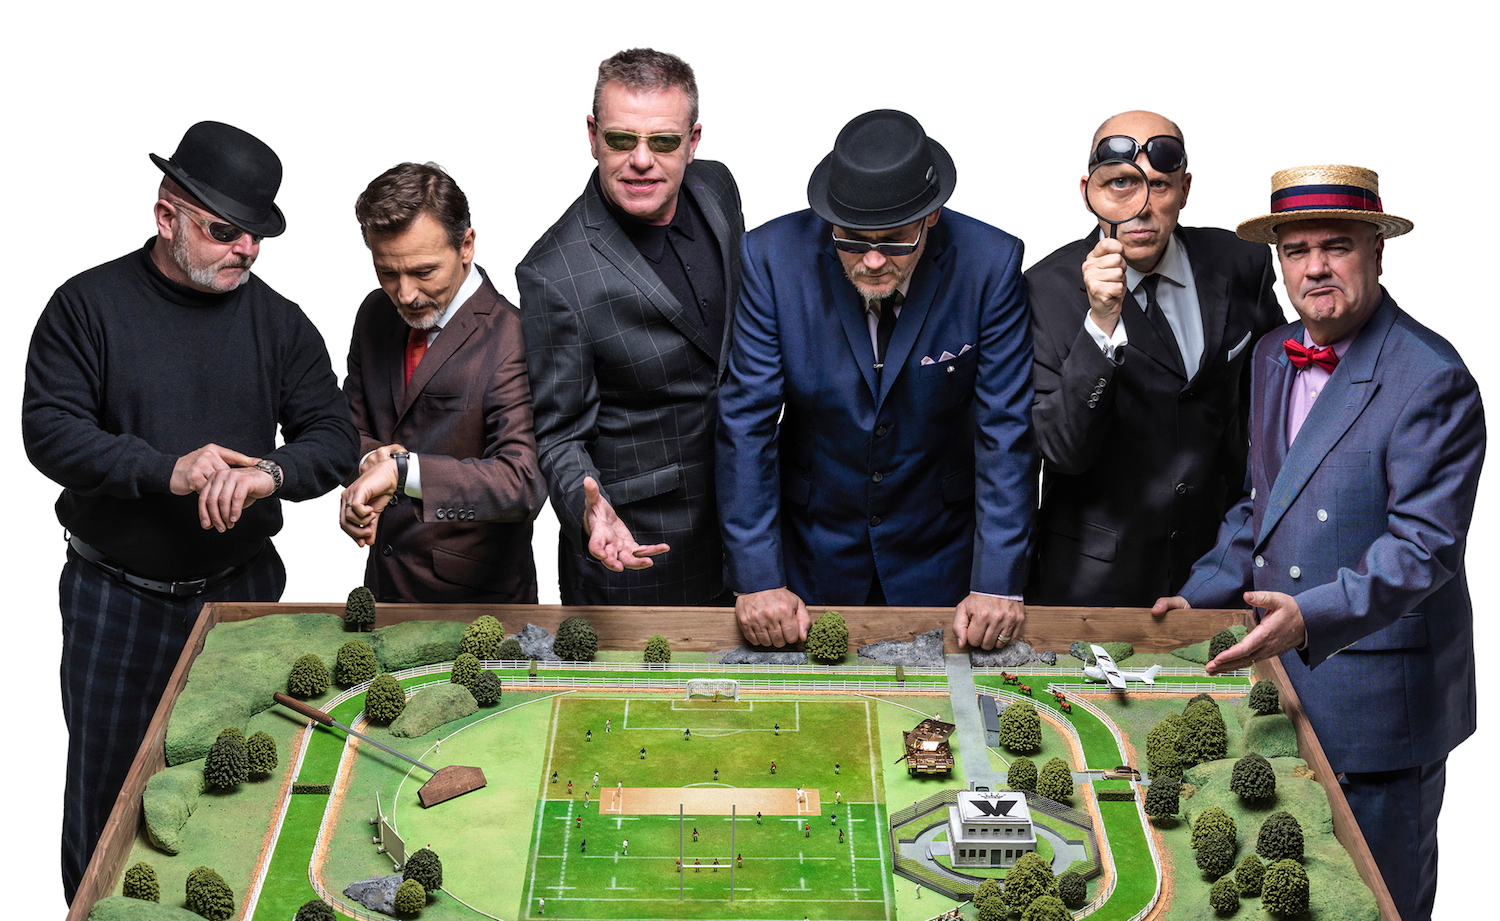 Legendary British band Madness will get the 2017 Cathay Pacific/HSBC Hong Kong Sevens party started